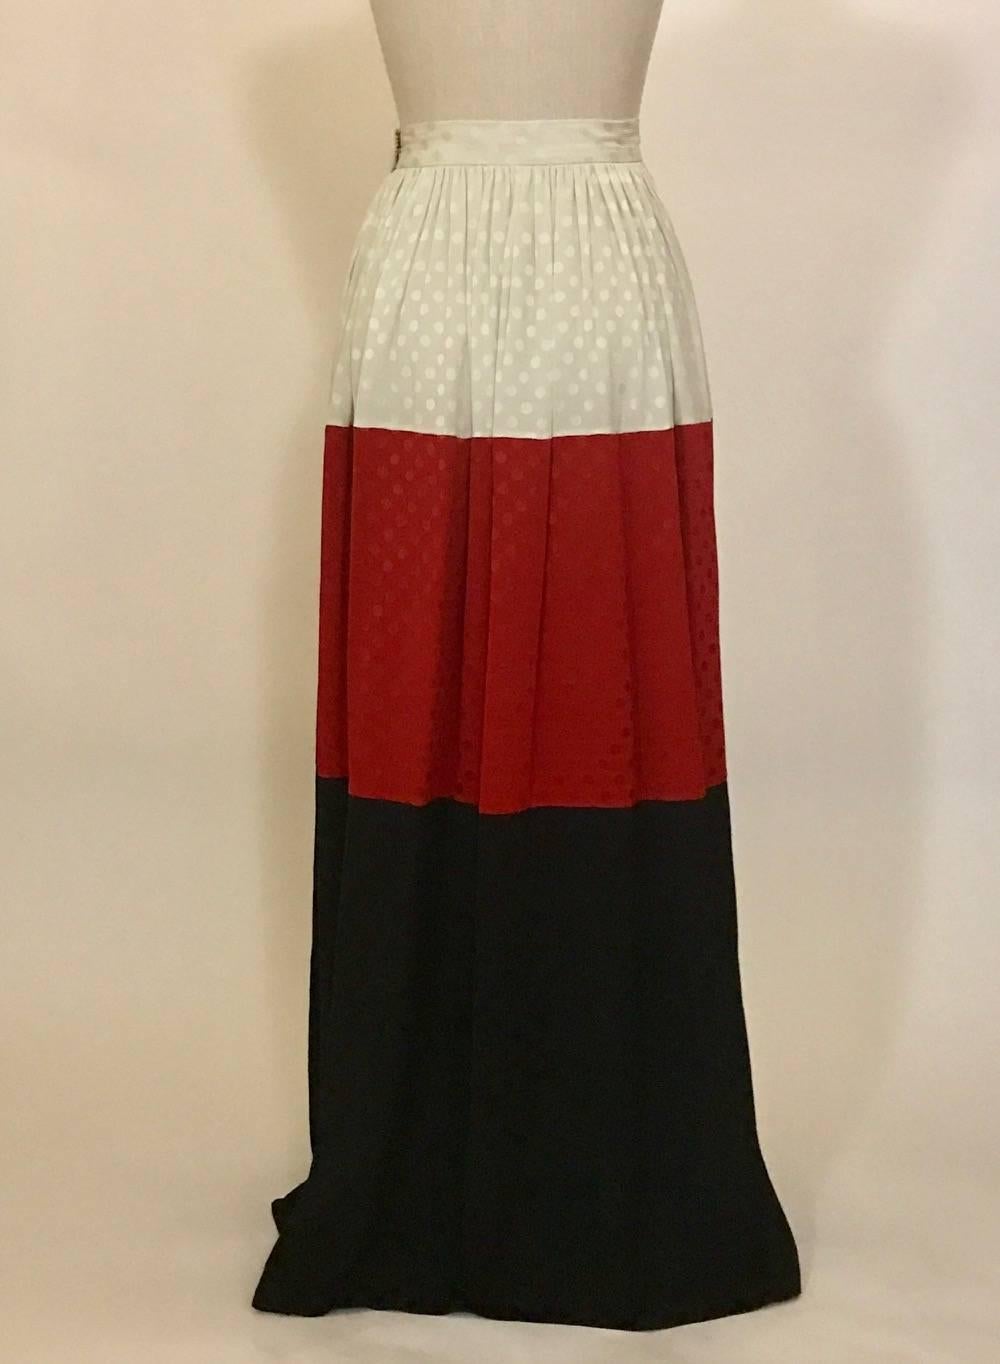 Michaele Vollbracht 1980s silk maxi skirt in a red, white, and black colorblock design with subtle polka dot texture. Fastens at waist with hook and eye.

100% silk.



Labeled size 4, but best fits 0 see measurements.
Waist 24